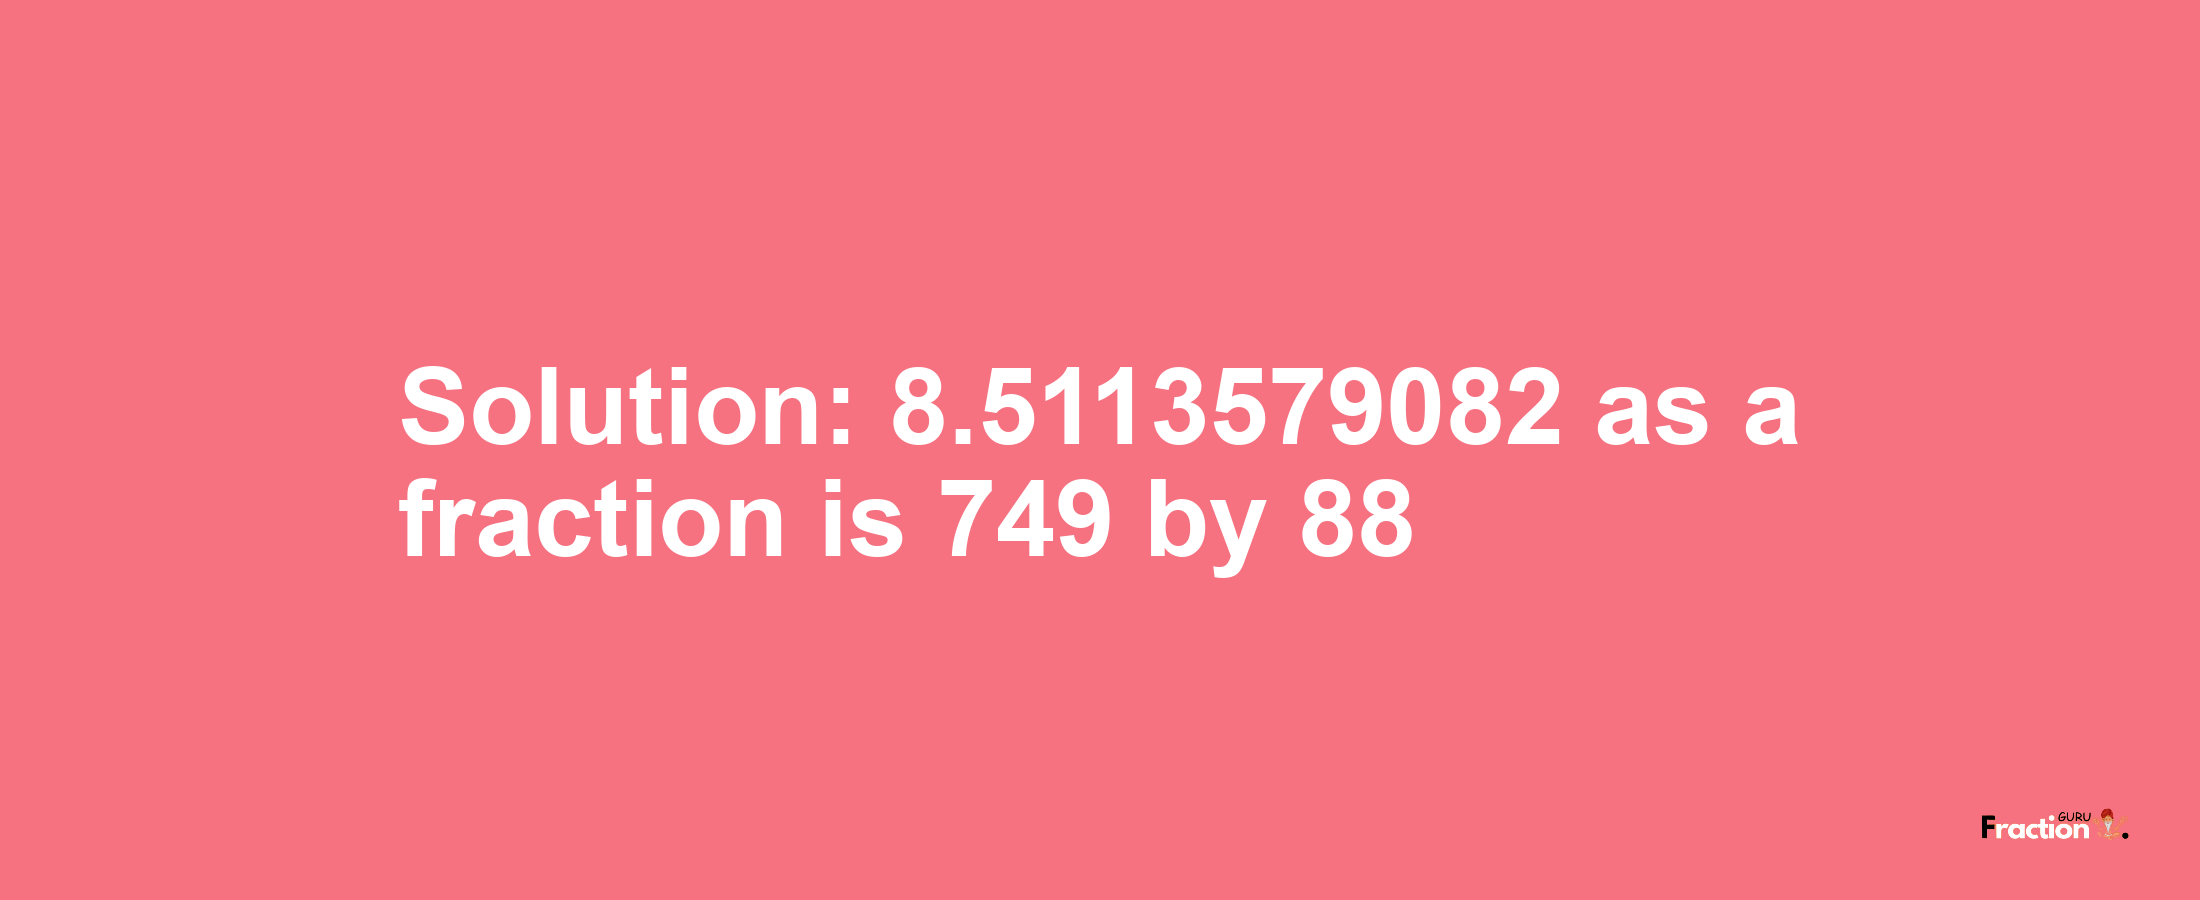 Solution:8.5113579082 as a fraction is 749/88